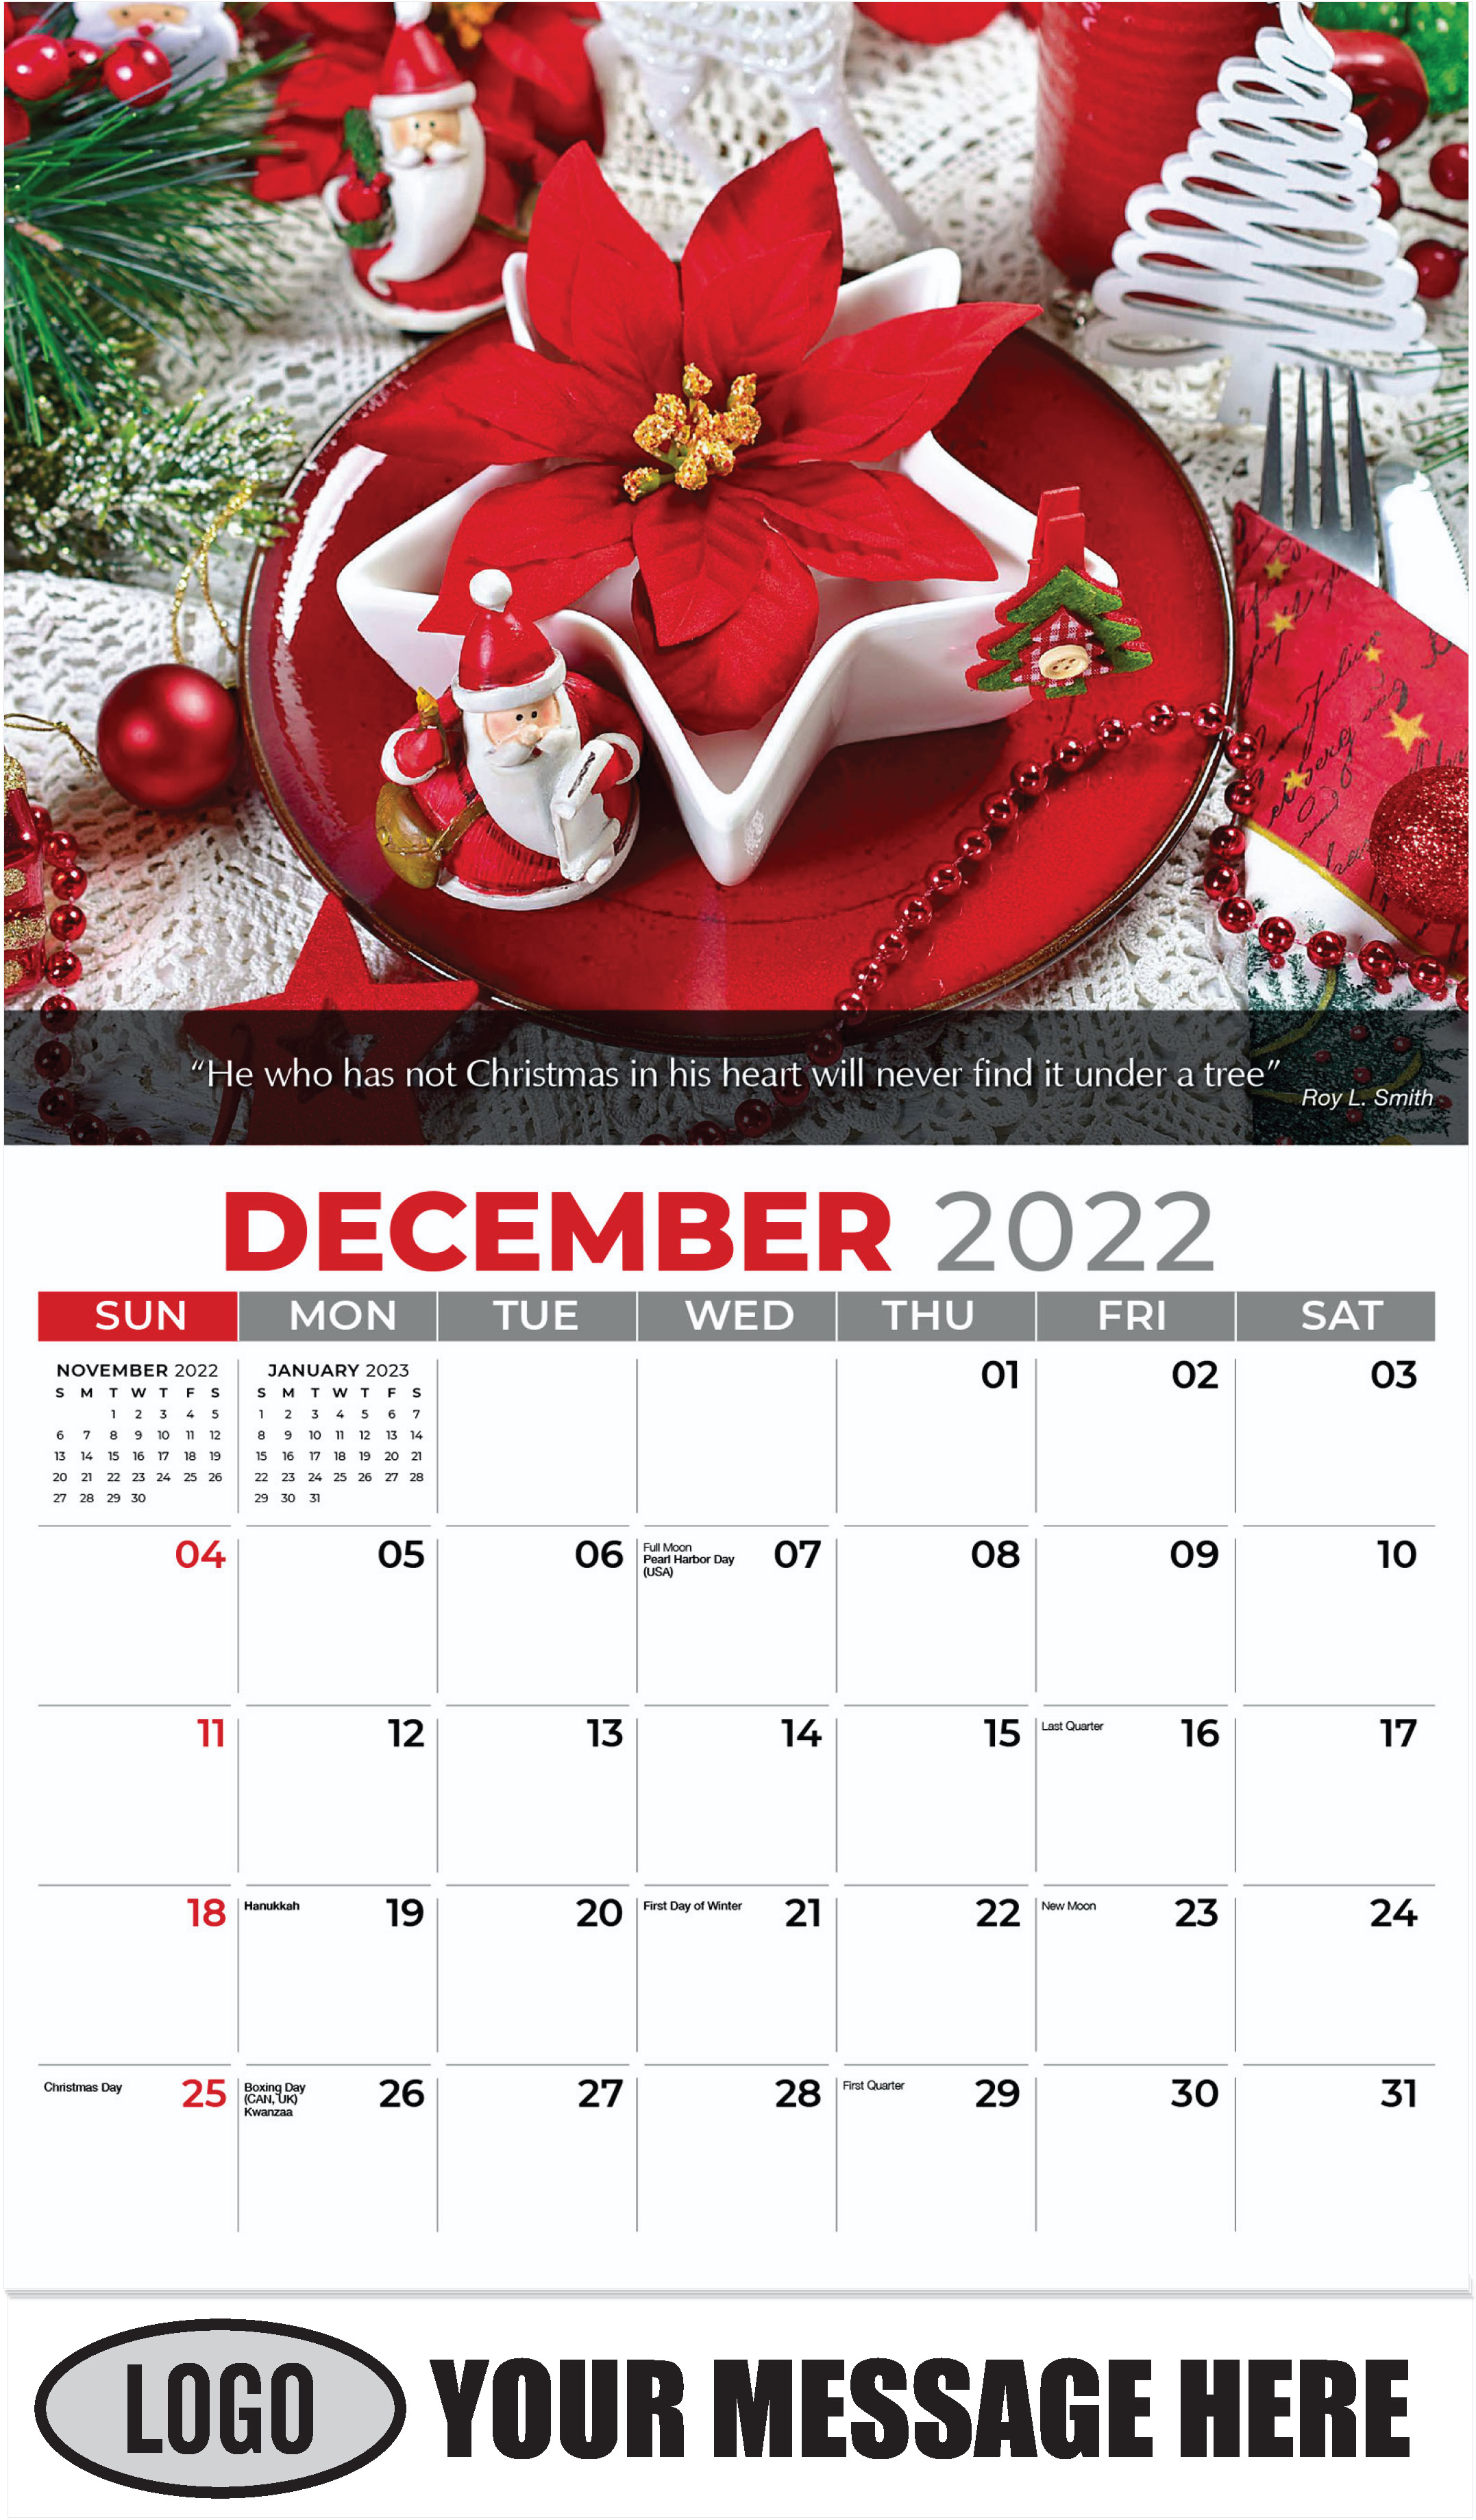 Red and White Decoration of Christmas Table - December 2022 - Flowers & Gardens 2023 Promotional Calendar